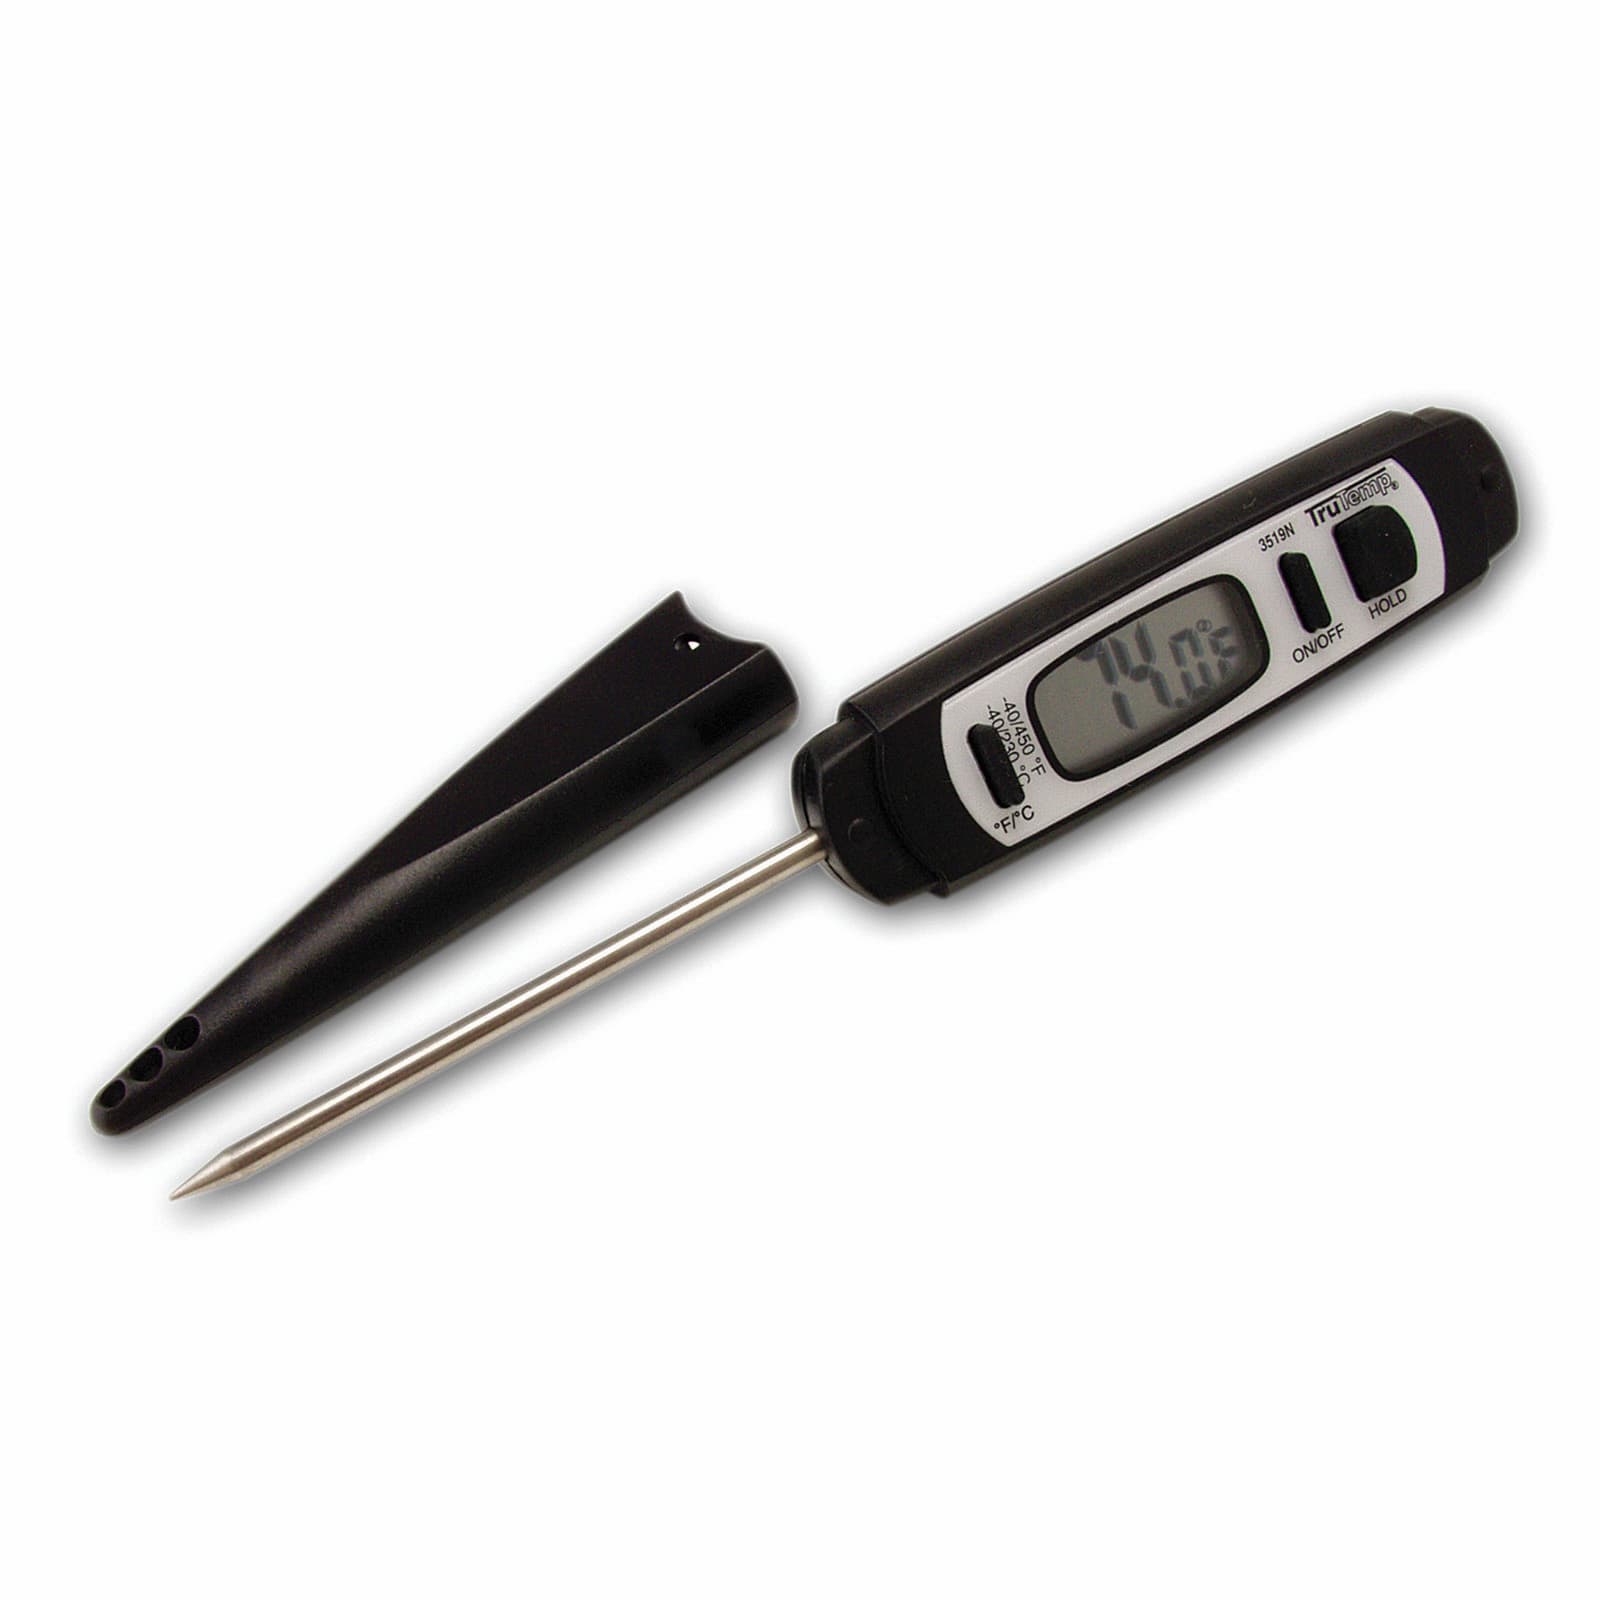 Taylor Pen Style Digital Kitchen Meat Cooking Thermometer